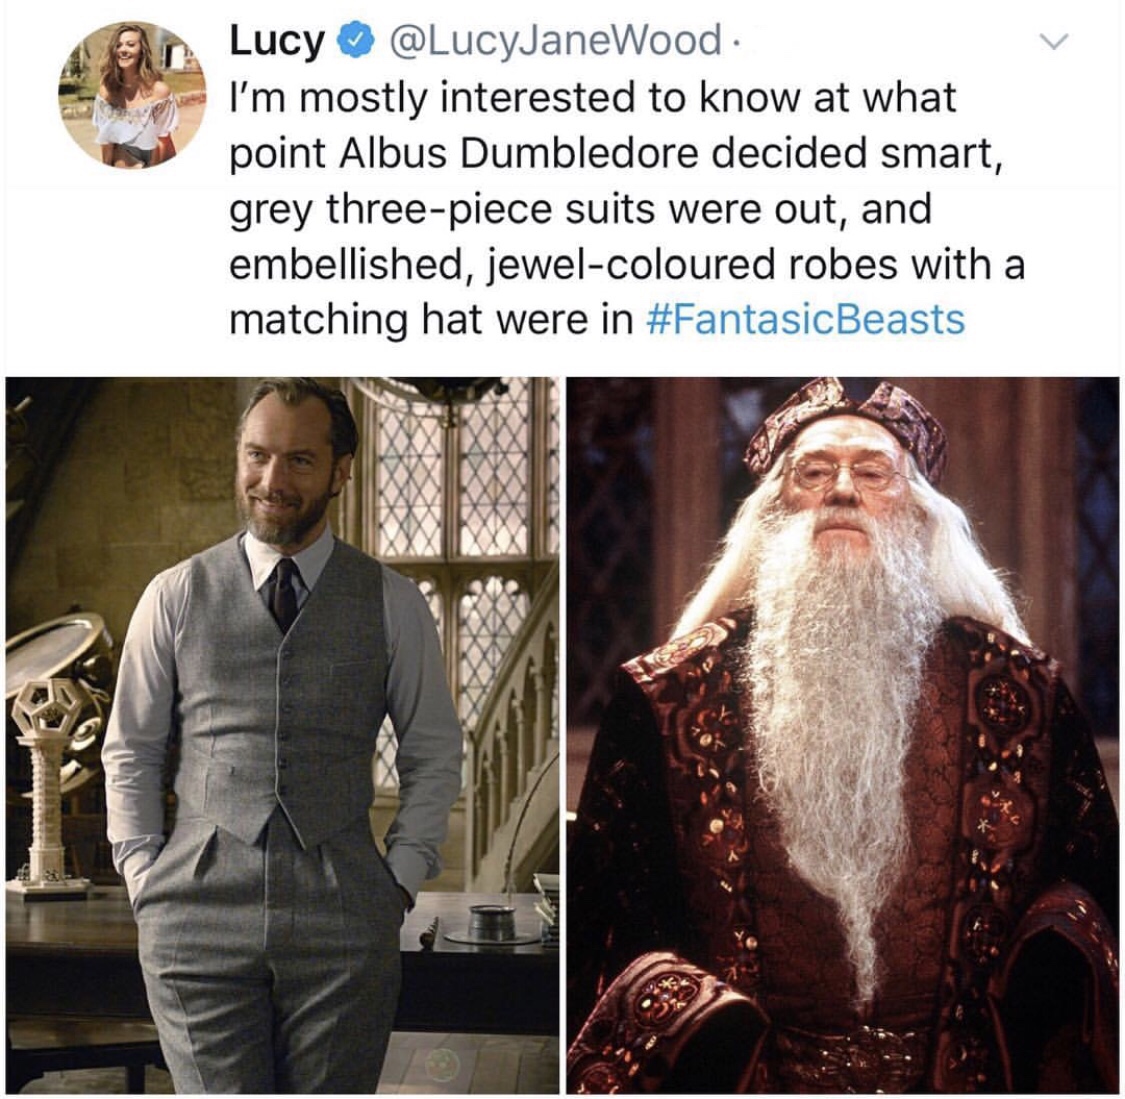 pics and memes - dumbledore three piece suit meme - Lucy . I'm mostly interested to know at what point Albus Dumbledore decided smart, grey threepiece suits were out, and embellished, jewelcoloured robes with a matching hat were in